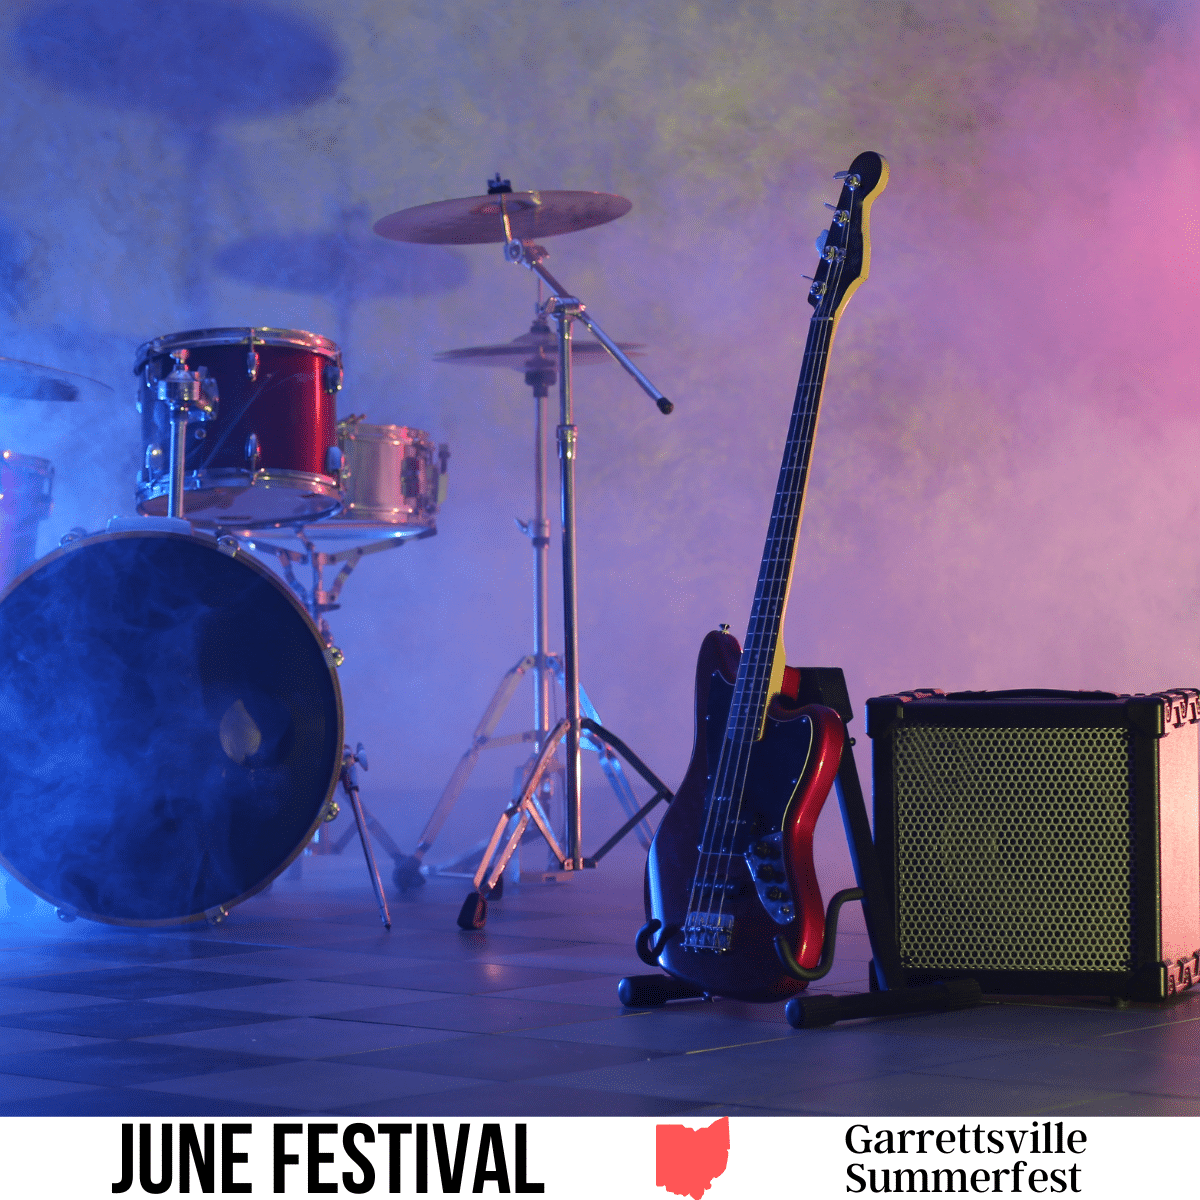 A square image of a photo of a band's instuments on a stage (drums, guitar). A white strip across the bottom has text June Festival Garrettsville Summerfest.